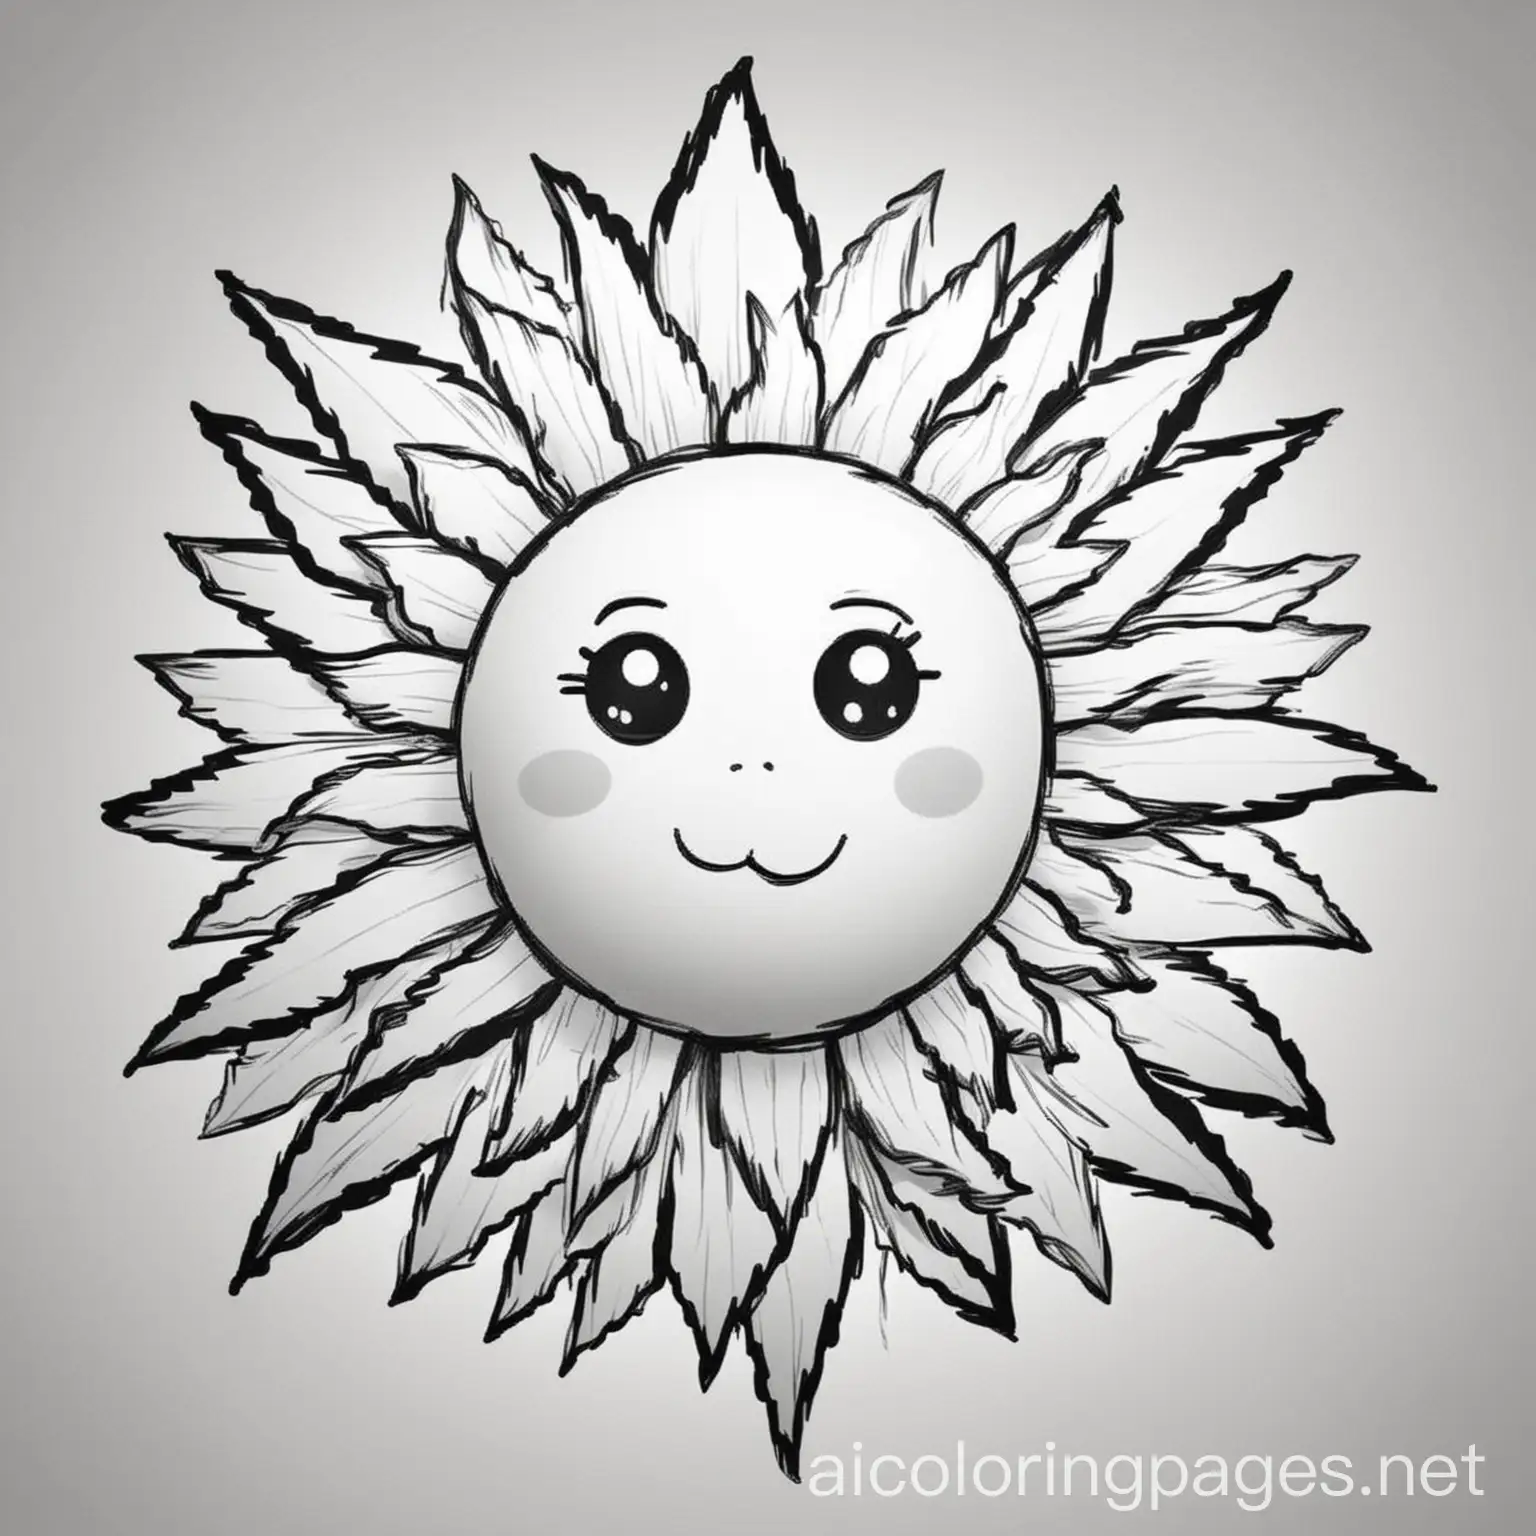 Cartoon sun  black and white lines white background, Coloring Page, black and white, line art, white background, Simplicity, Ample White Space. The background of the coloring page is plain white to make it easy for young children to color within the lines. The outlines of all the subjects are easy to distinguish, making it simple for kids to color without too much difficulty